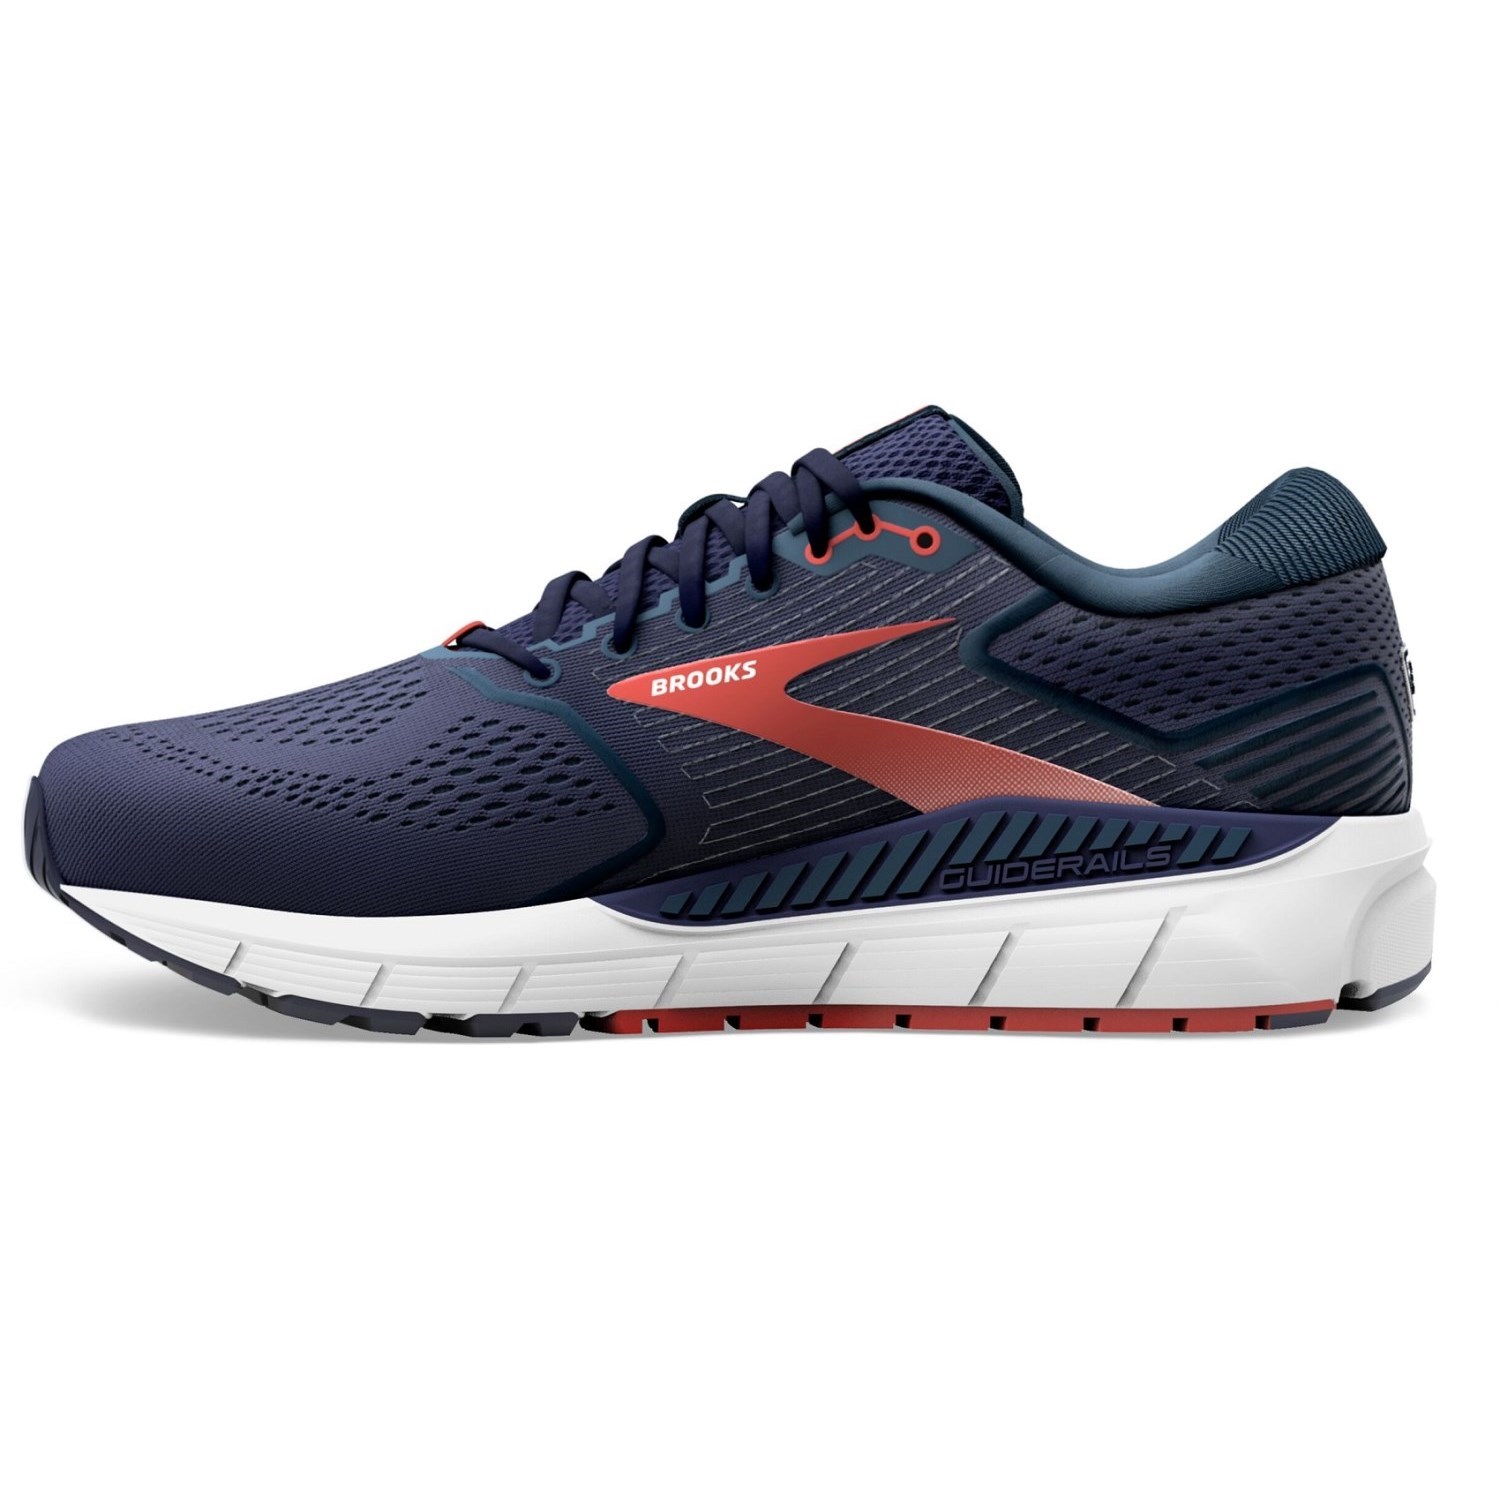 Brooks Beast 20 - Mens Running Shoes - Peacoat/Midnight/Red | Sportitude